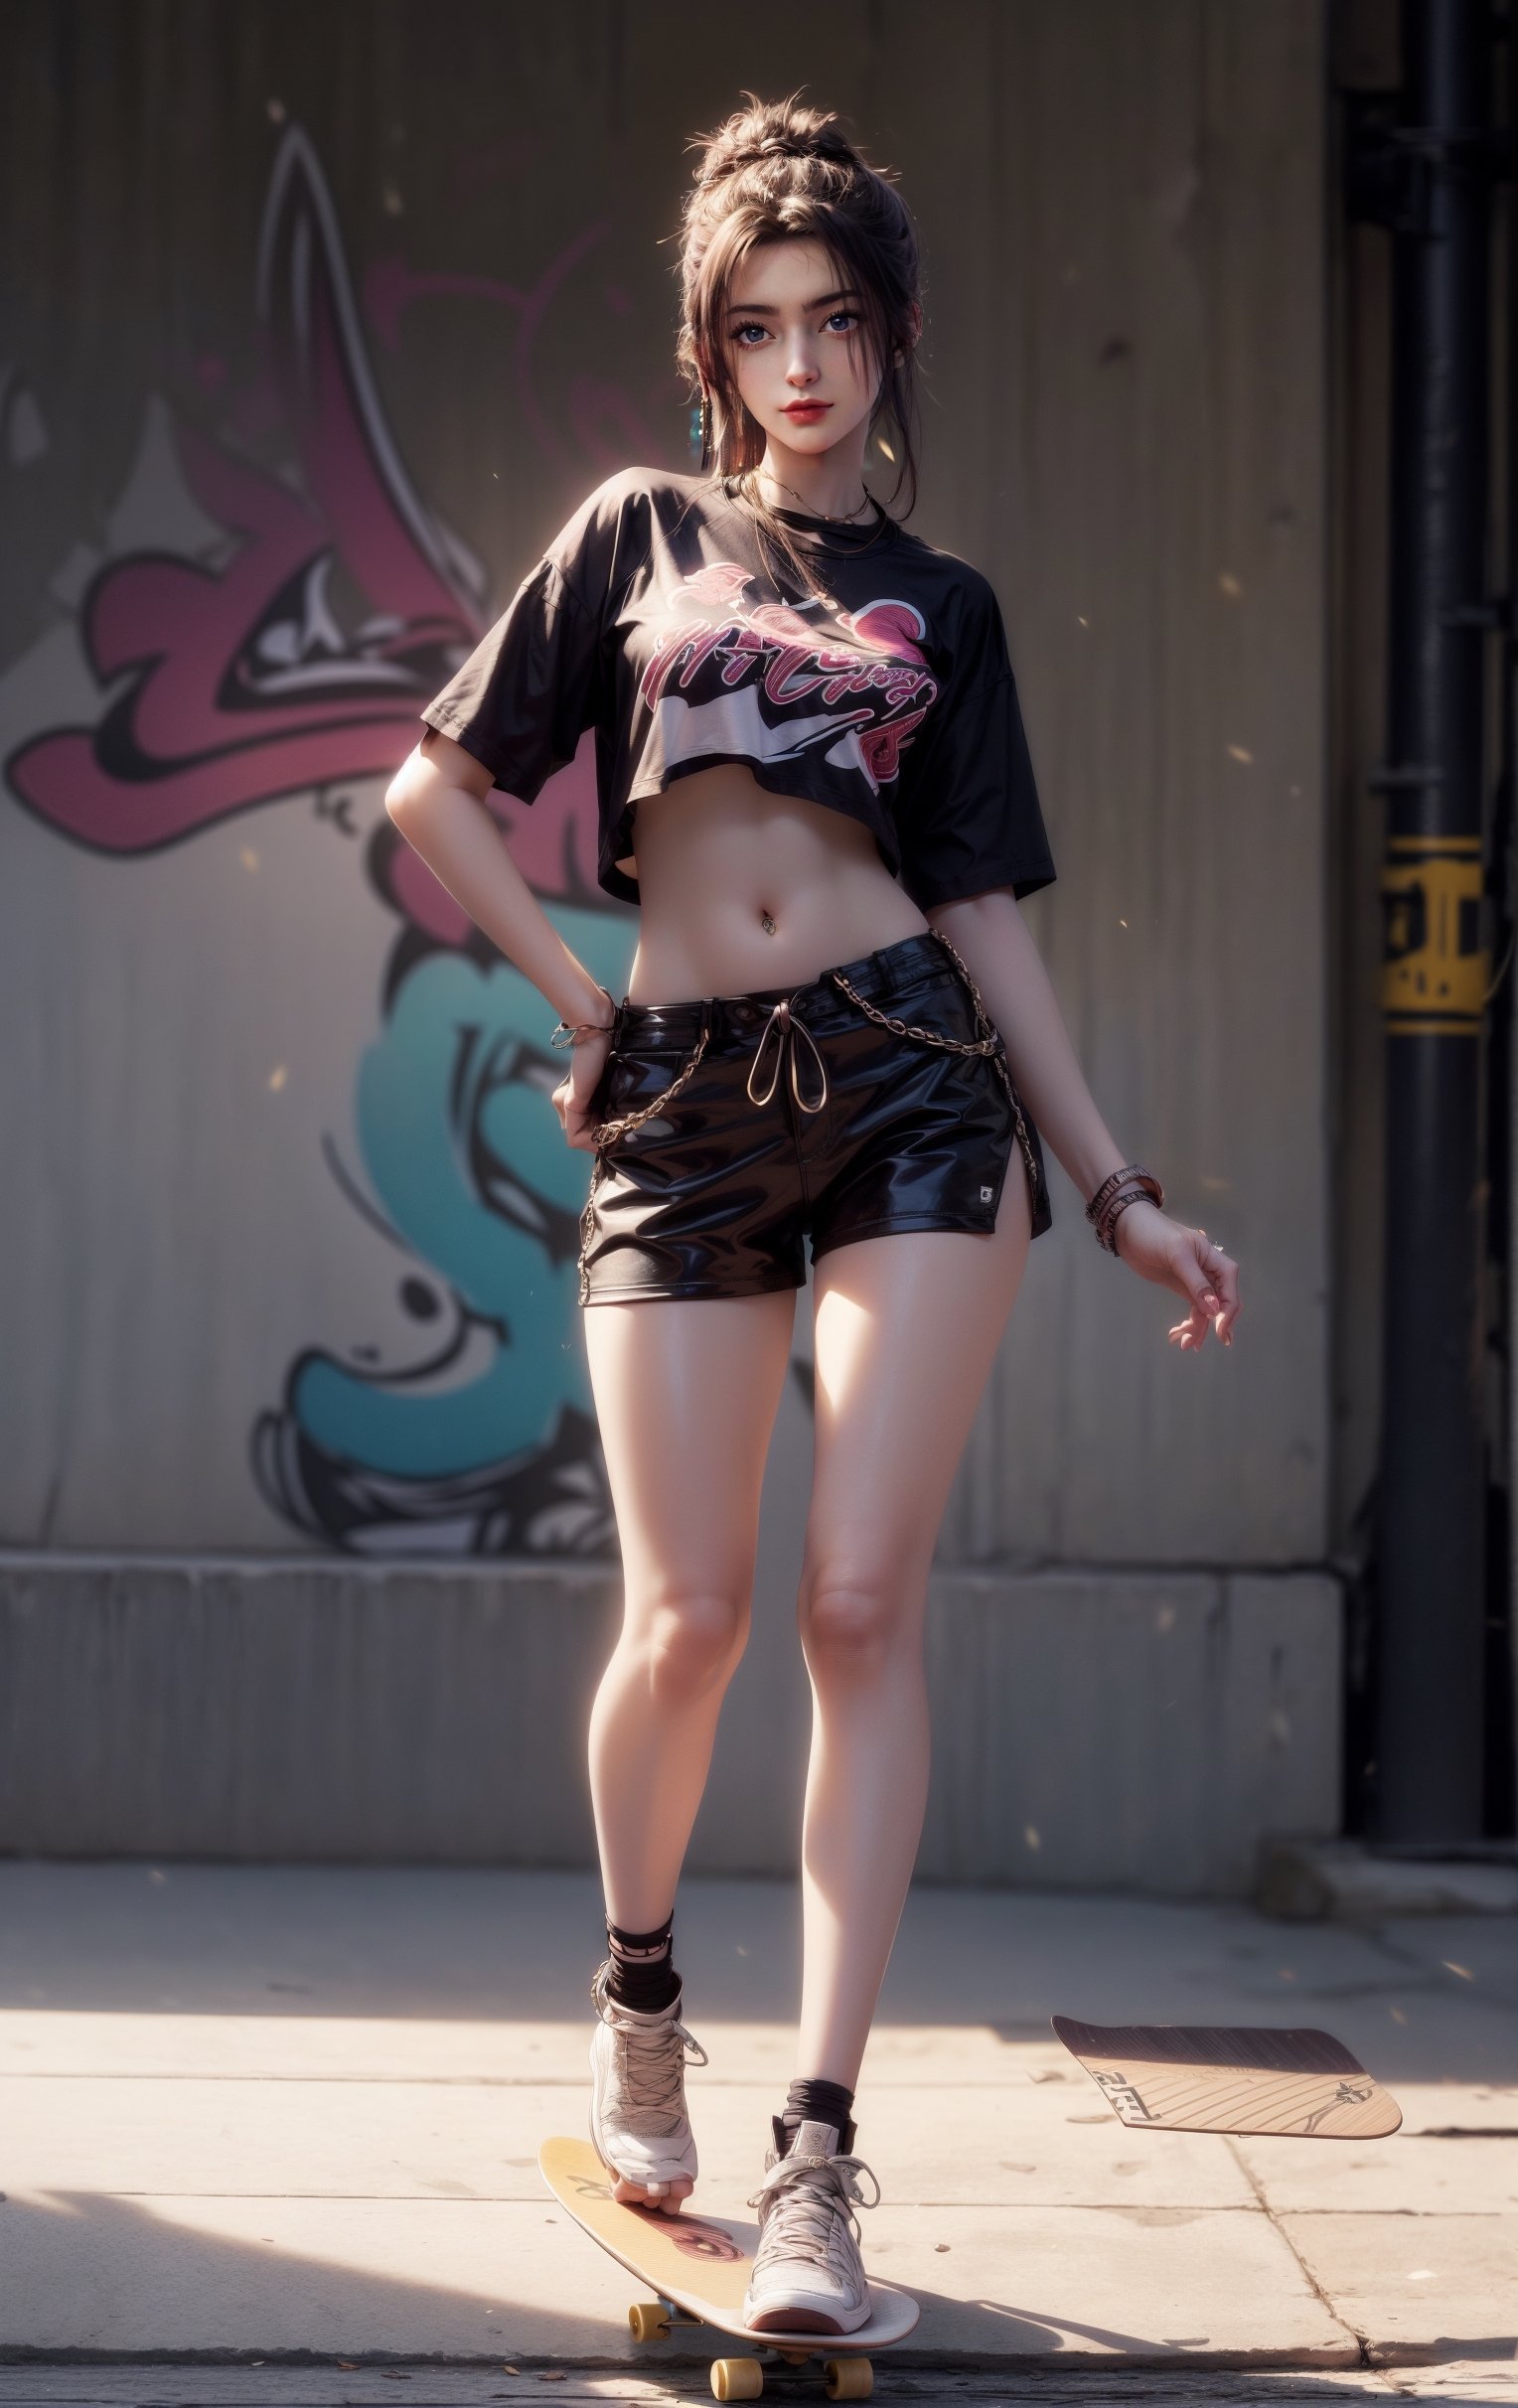 1 girl, beautiful korean girl, looking at viewer, 18yo, over sized eyes, big eyes, smiling, HDR raw photo, silver long hair, ahoge, urban and street style, graffiti-inspired colors, cool and edgy attire, tight T-shirt, show navel,show waist,stylish sneakers, fashionable accessories, hip hop jewelry, confident expression, graffiti walls, energetic and vibrant atmosphere, dynamic pose, looking at viewer,masterpiece,best quality,long legs,((long skateboard)),((sport pose)),long land,skateboarding,